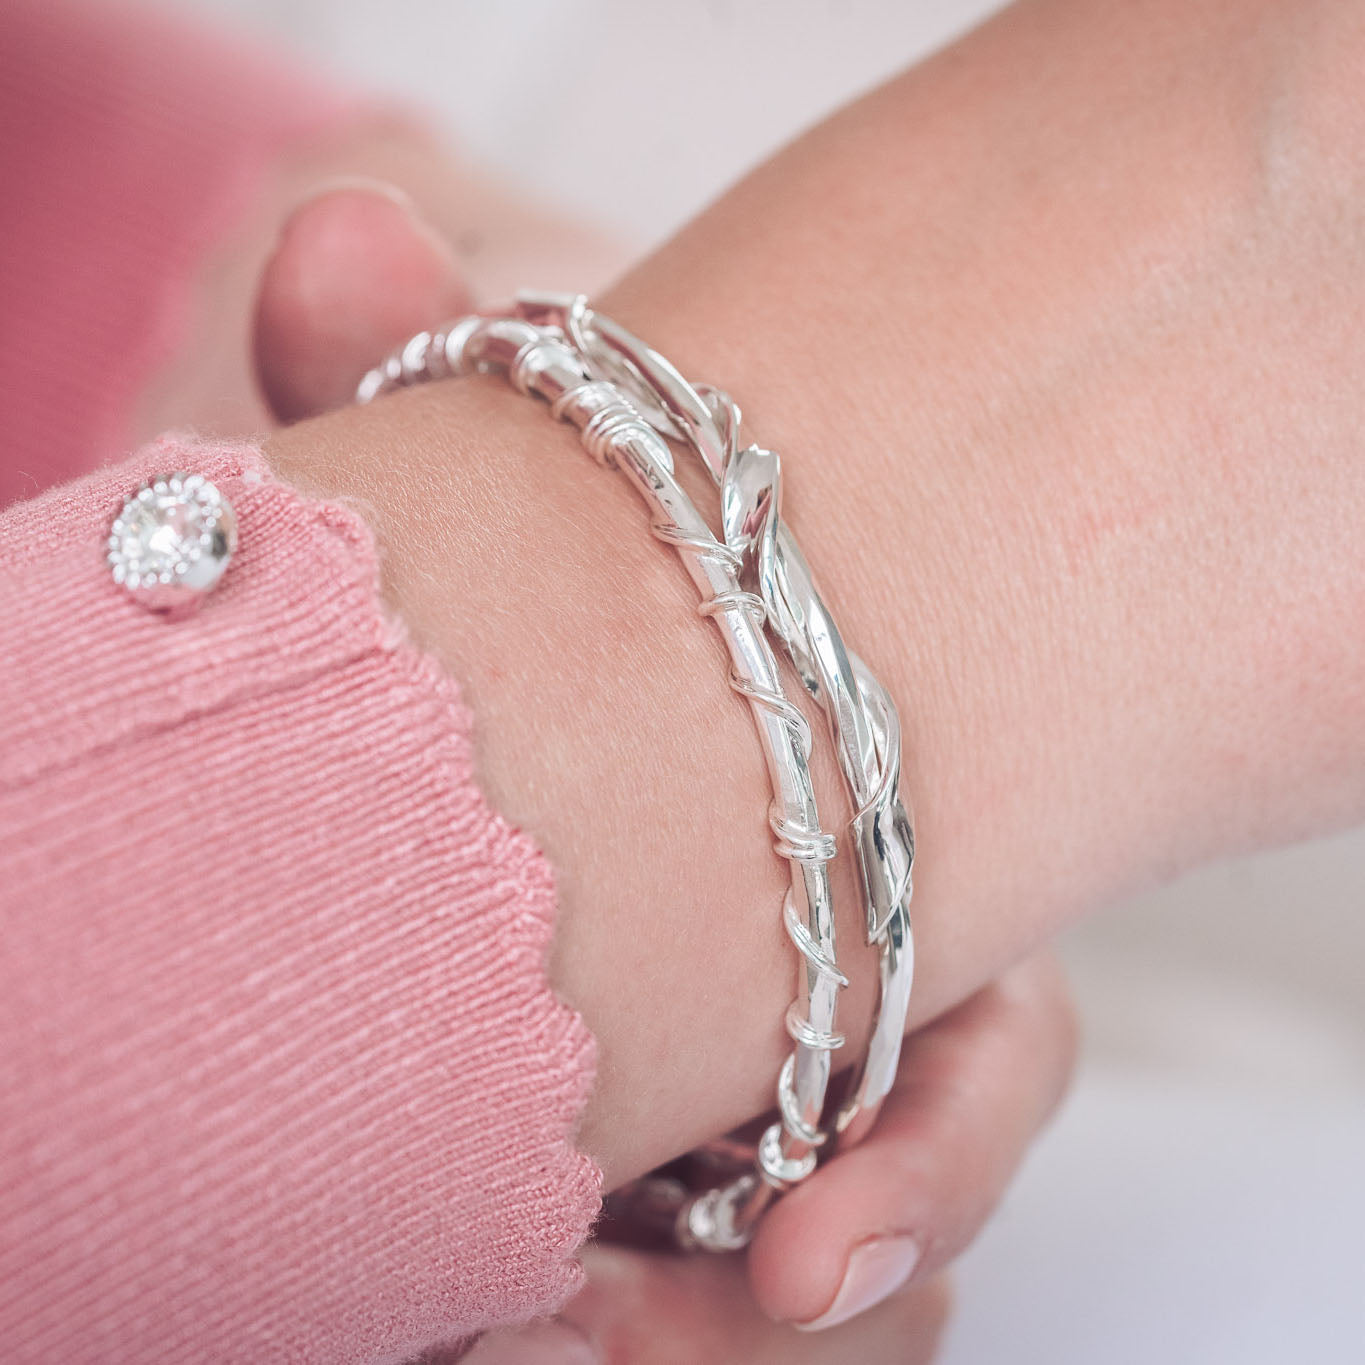 Handmade Silver Textured Bangle With Twisted Ribbon Detail